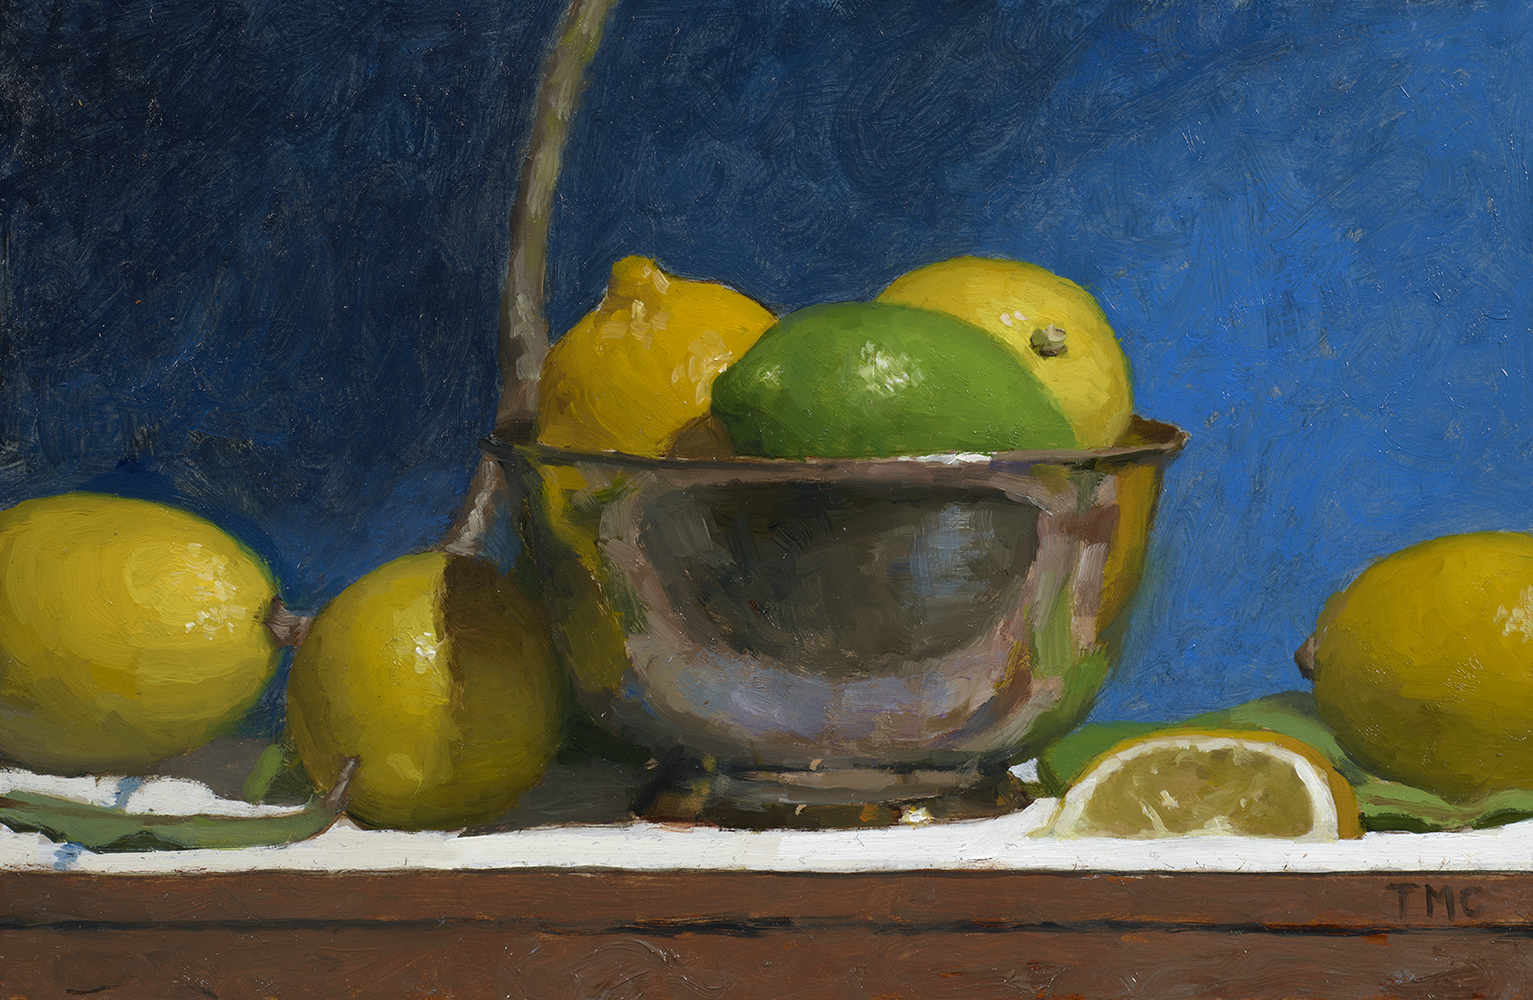 todd_casey_tc1191_lemons_and_limes_in_silver_bowl.jpg